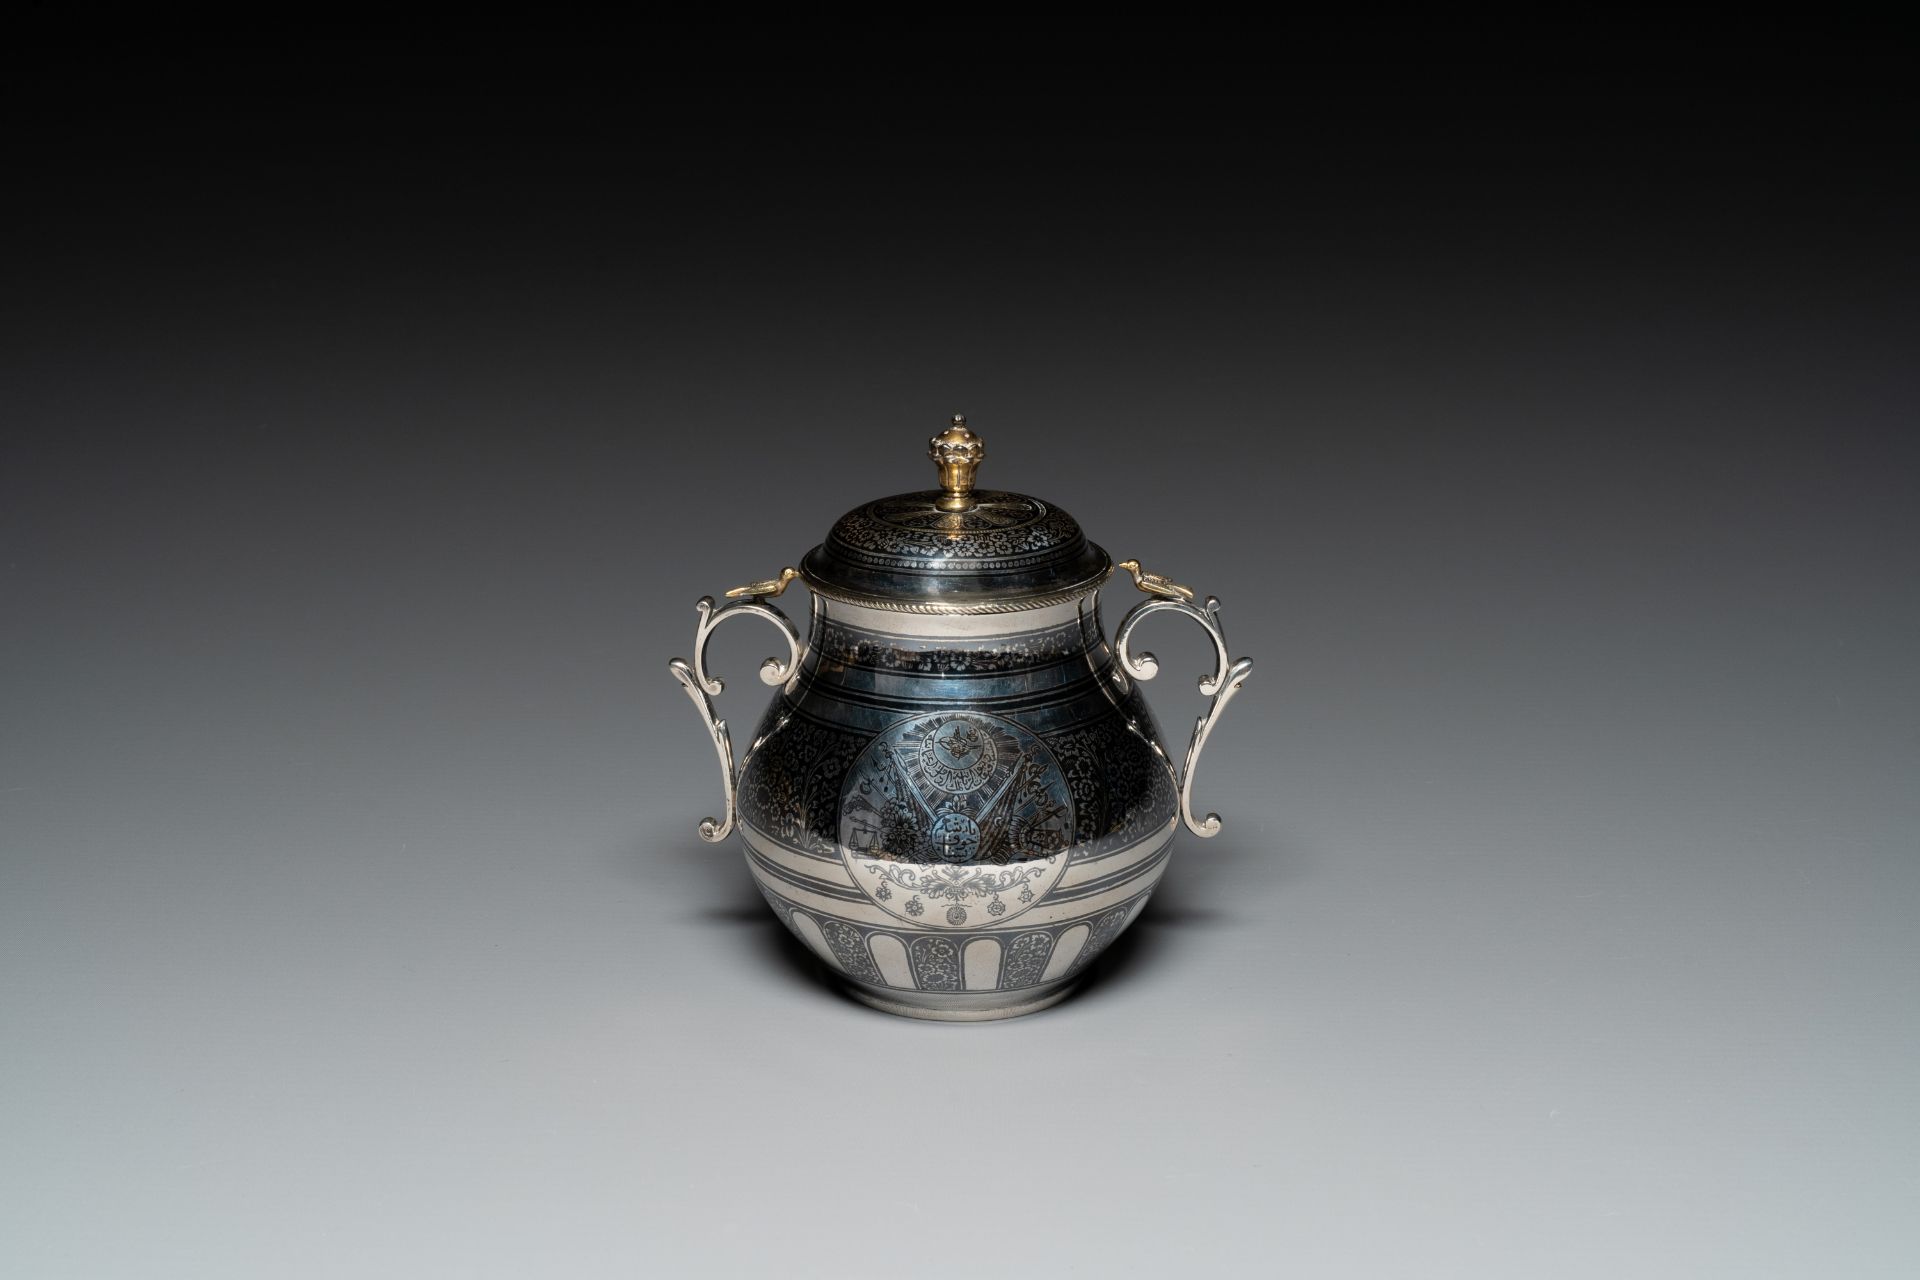 An Ottoman parcel-gilt niello silver vessel and cover, Turkey, period of Sultan Abdulhamid II (1876- - Image 3 of 6